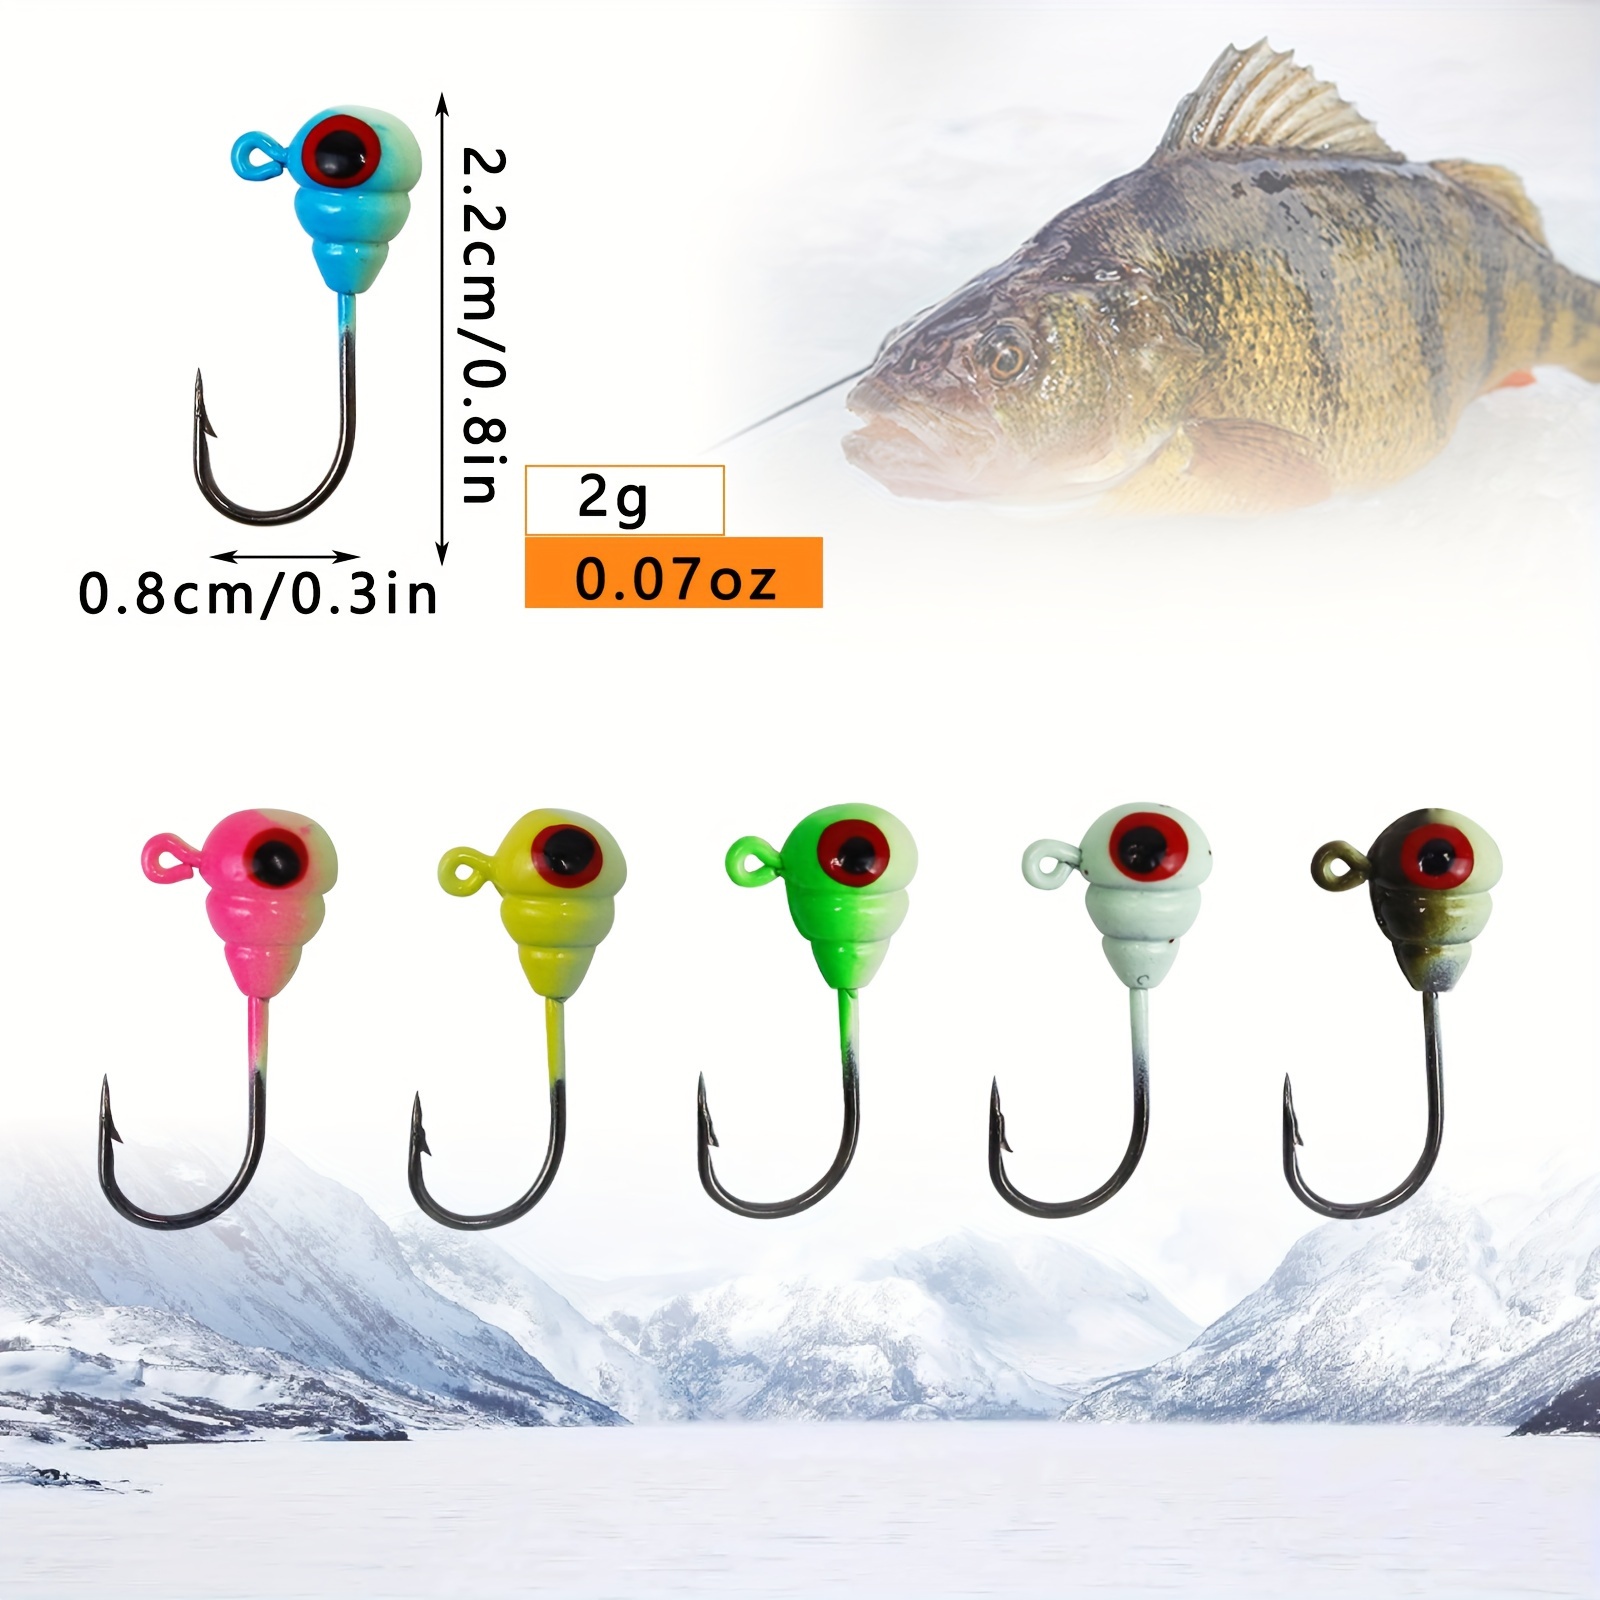  Ice Fishing Jigs Lures Kit Walleye Perch Panfish Crappie  Bluegill Ice Fishing Gear Tackle Box 75 Pcs Include 26 Page How To Ice Fish  Book